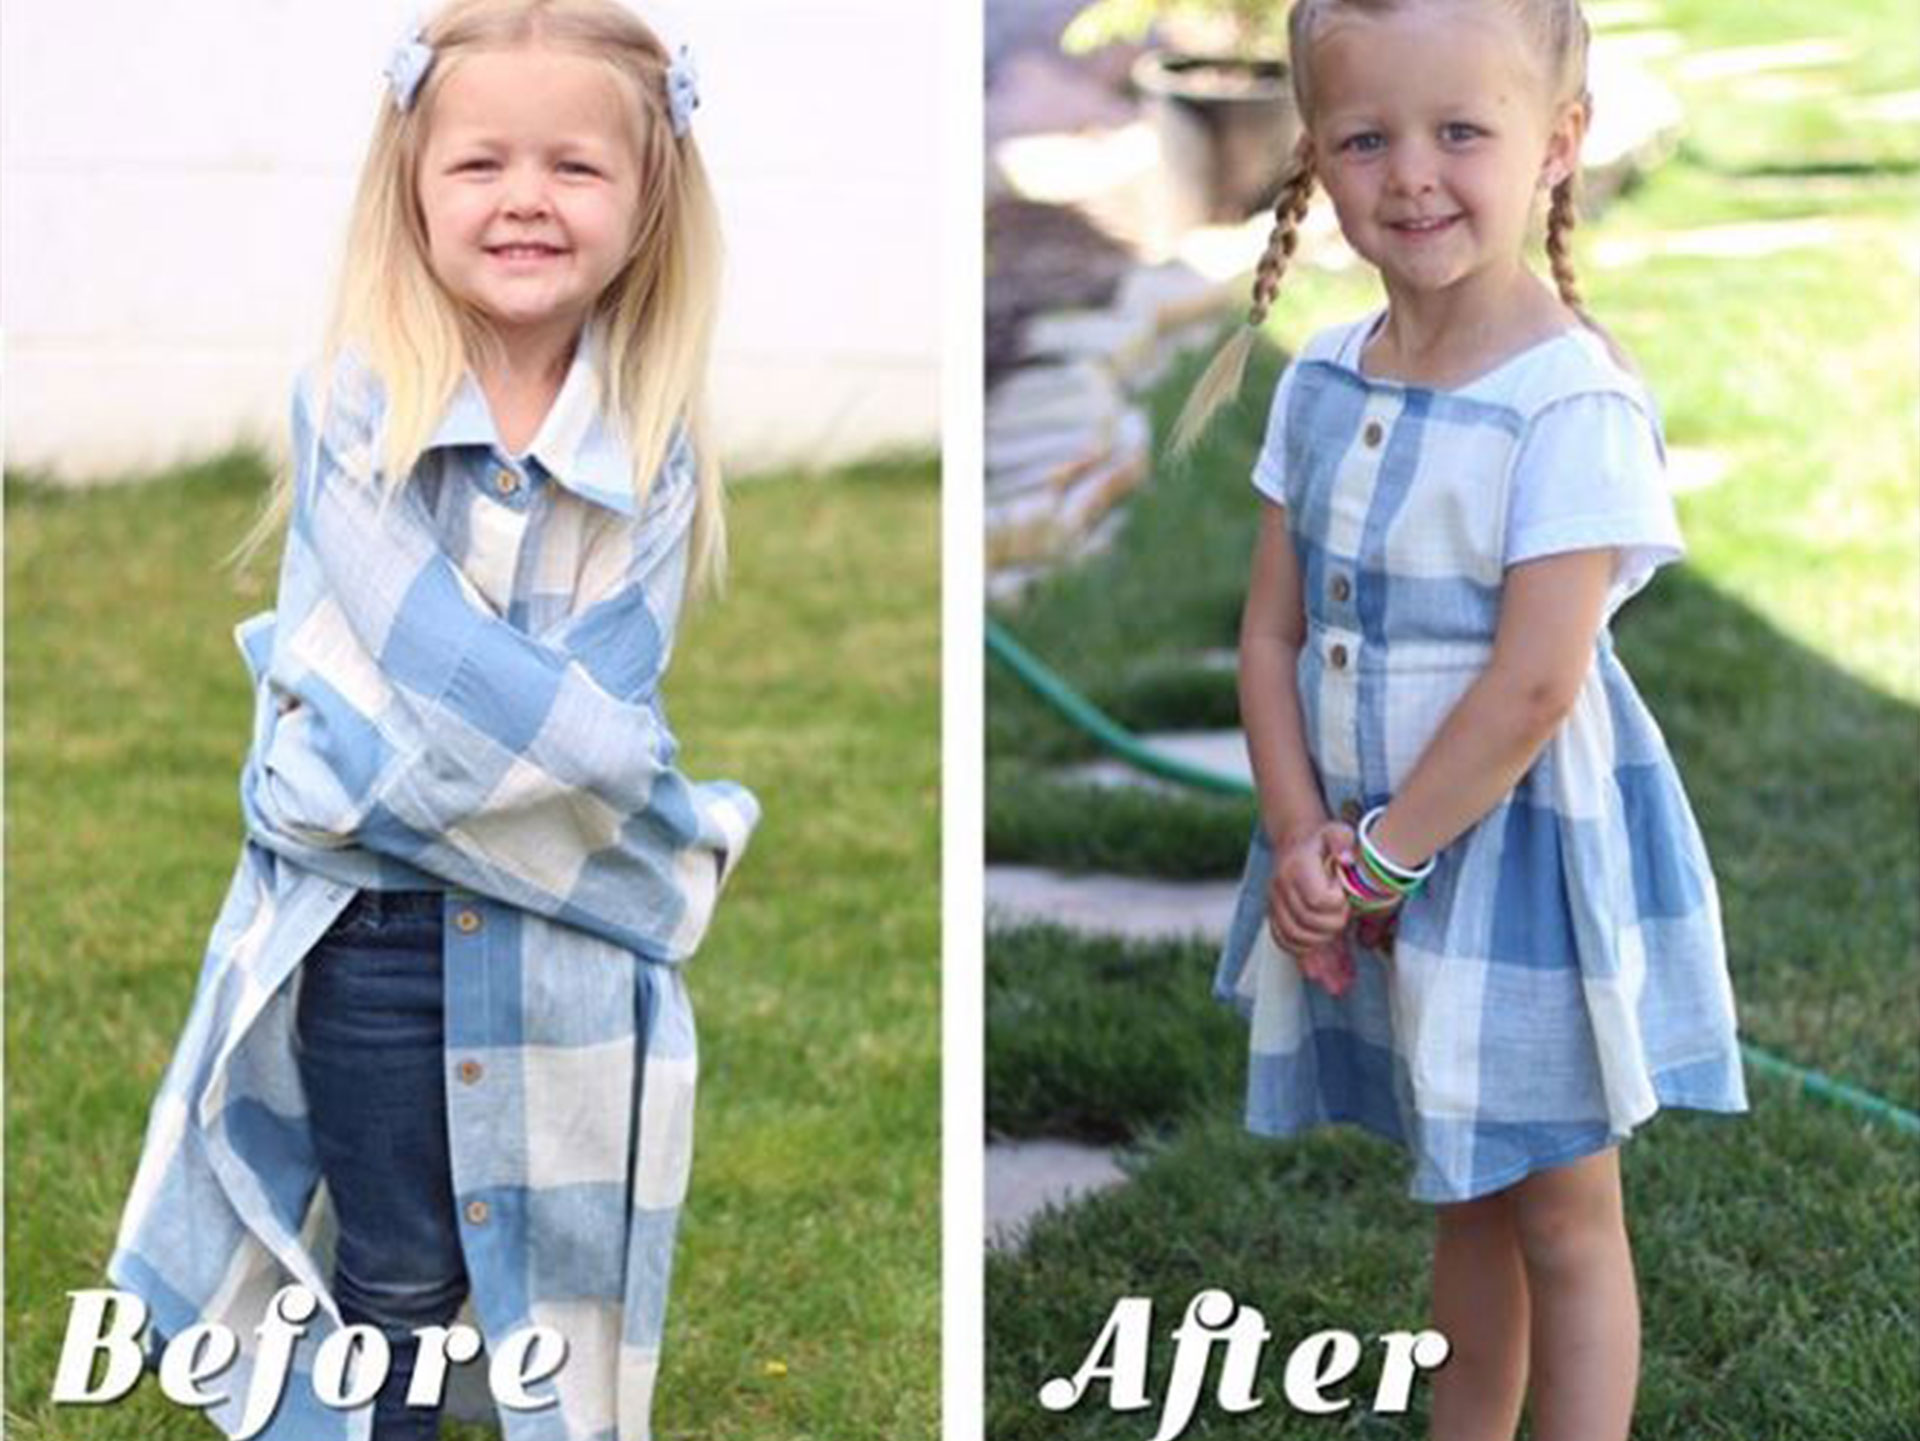 Mum transforms husband's old dress shirts into adorable outfits for her daughters